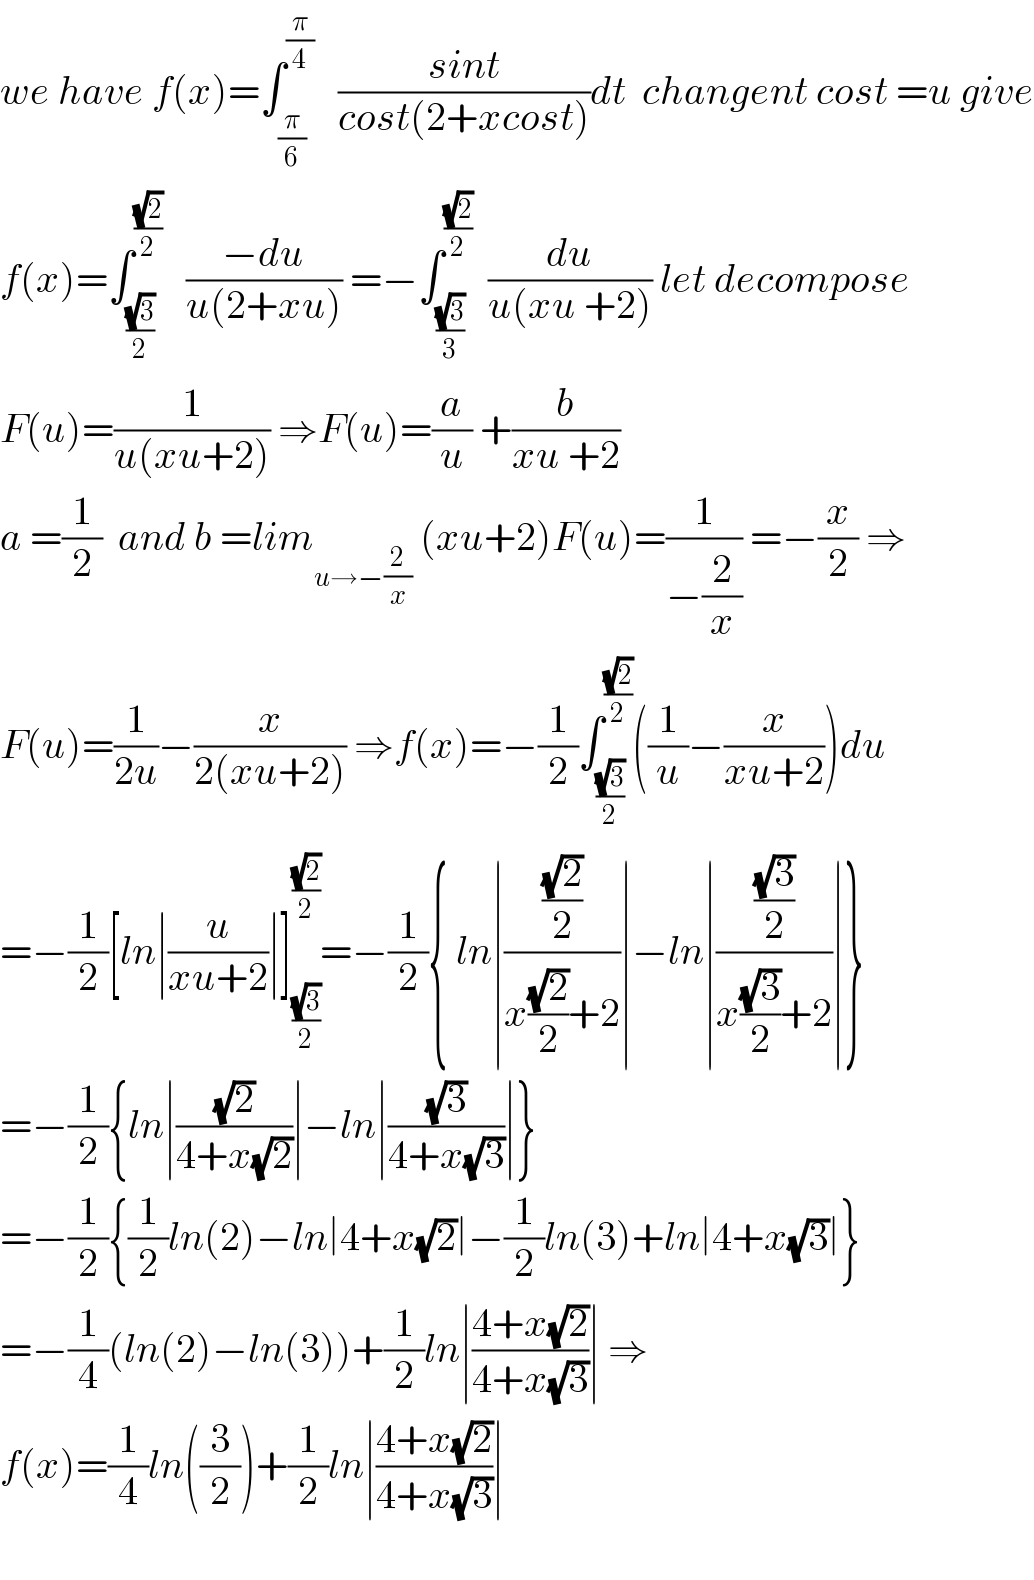 we have f(x)=∫_(π/6) ^(π/4)    ((sint)/(cost(2+xcost)))dt  changent cost =u give  f(x)=∫_((√3)/2) ^((√2)/2)    ((−du)/(u(2+xu))) =−∫_((√3)/3) ^((√2)/2)   (du/(u(xu +2))) let decompose  F(u)=(1/(u(xu+2))) ⇒F(u)=(a/u) +(b/(xu +2))  a =(1/2)  and b =lim_(u→−(2/x))  (xu+2)F(u)=(1/(−(2/x))) =−(x/2) ⇒  F(u)=(1/(2u))−(x/(2(xu+2))) ⇒f(x)=−(1/2)∫_((√3)/2) ^((√2)/2) ((1/u)−(x/(xu+2)))du  =−(1/2)[ln∣(u/(xu+2))∣]_((√3)/2) ^((√2)/2) =−(1/2){ ln∣(((√2)/2)/(x((√2)/2)+2))∣−ln∣(((√3)/2)/(x((√3)/2)+2))∣}  =−(1/2){ln∣((√2)/(4+x(√2)))∣−ln∣((√3)/(4+x(√3)))∣}  =−(1/2){(1/2)ln(2)−ln∣4+x(√2)∣−(1/2)ln(3)+ln∣4+x(√3)∣}  =−(1/4)(ln(2)−ln(3))+(1/2)ln∣((4+x(√2))/(4+x(√3)))∣ ⇒  f(x)=(1/4)ln((3/2))+(1/2)ln∣((4+x(√2))/(4+x(√3)))∣    